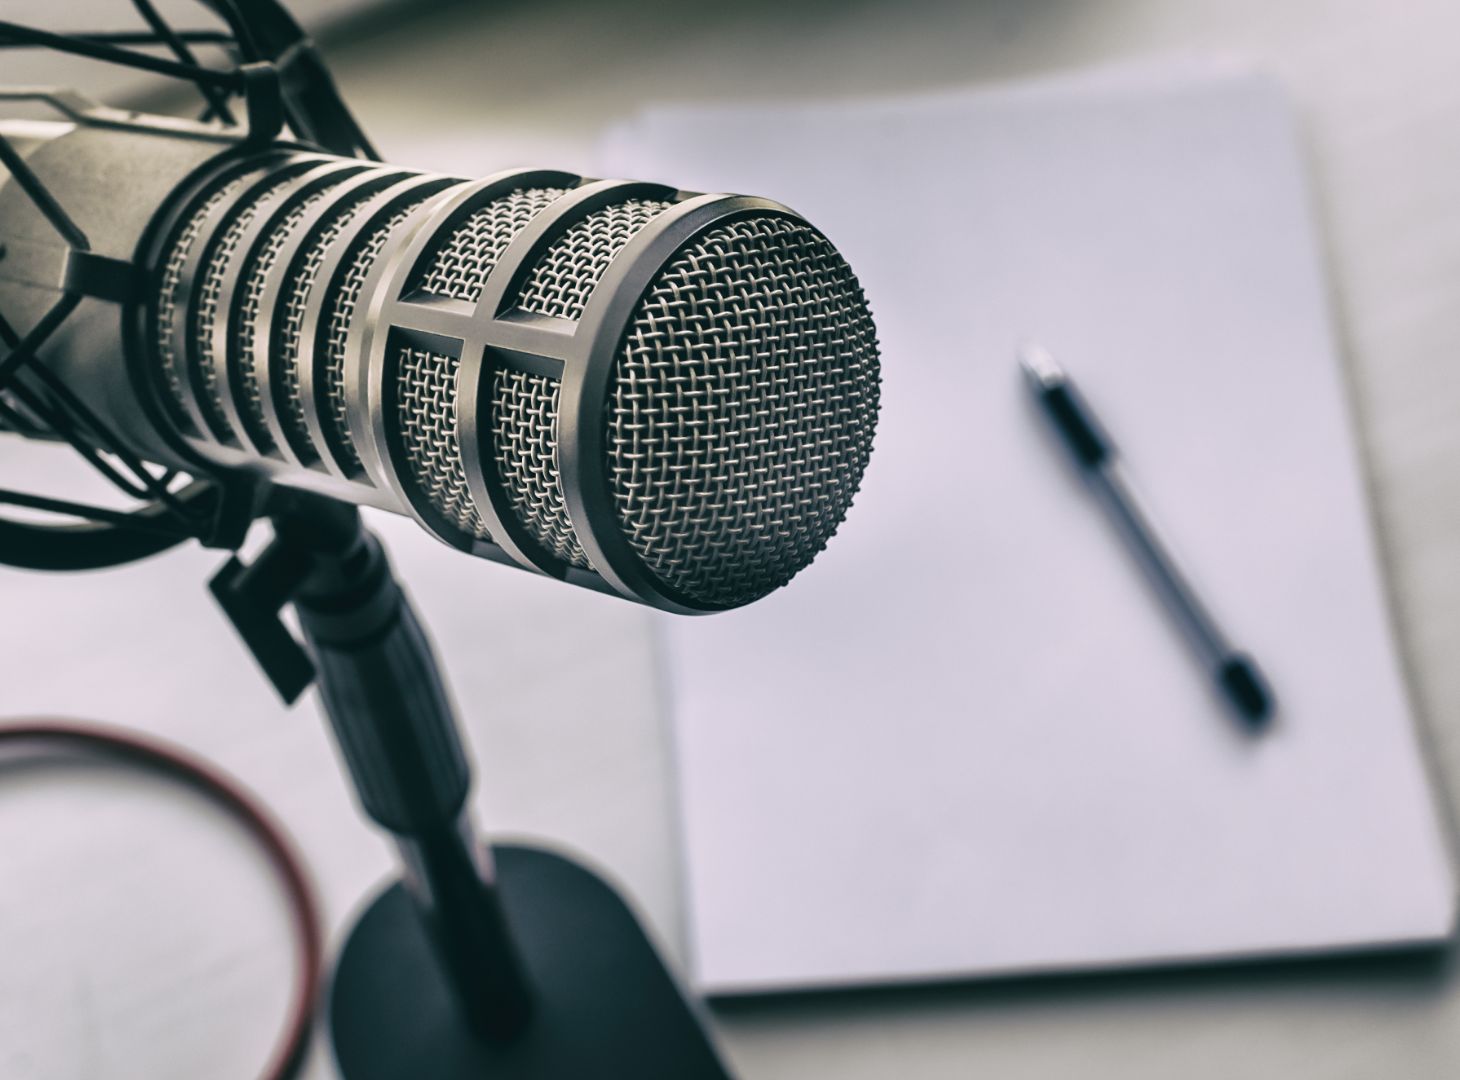 Image of Microphone next to a pen on paper